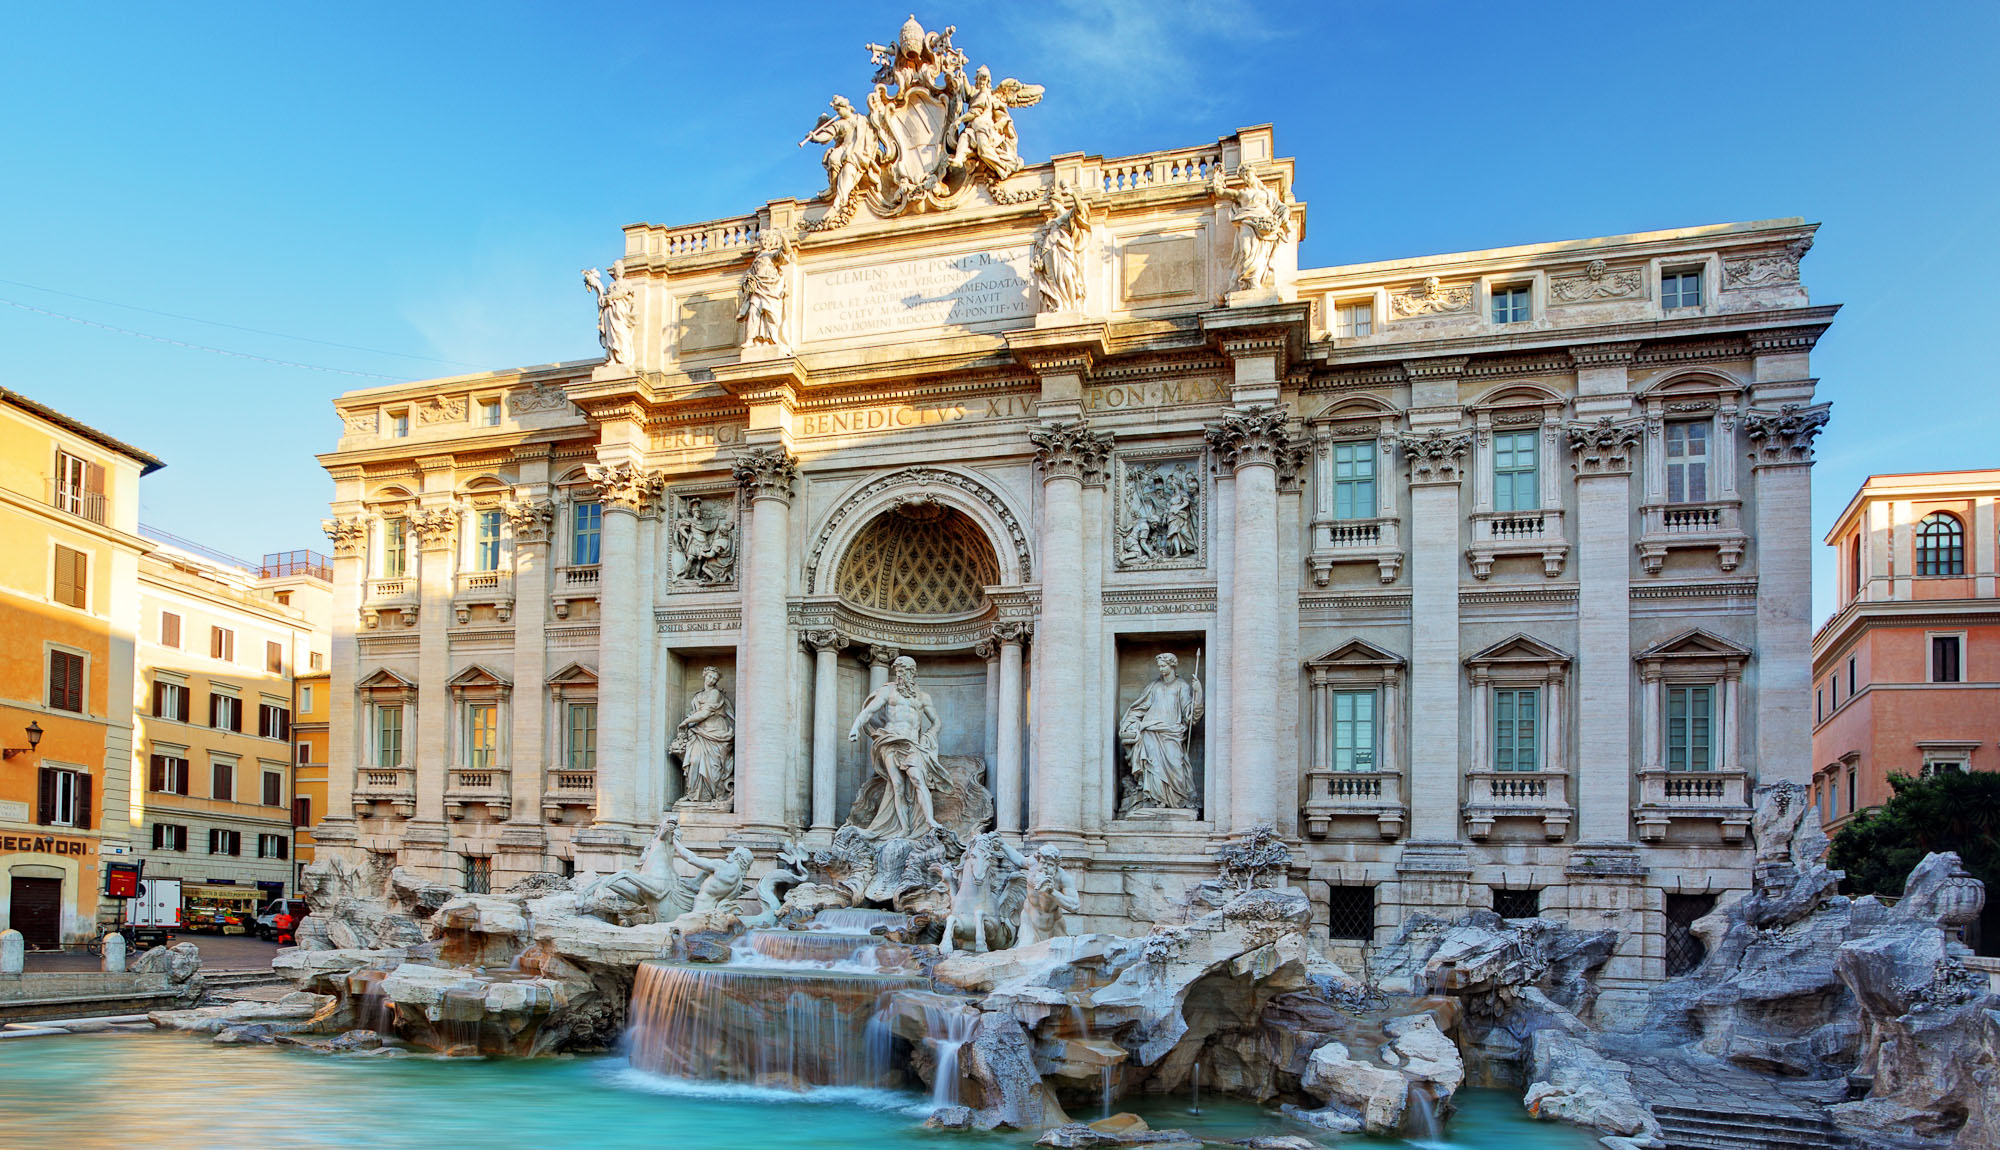 10 facts about the Trevi Fountain in Rome - Italian Notes